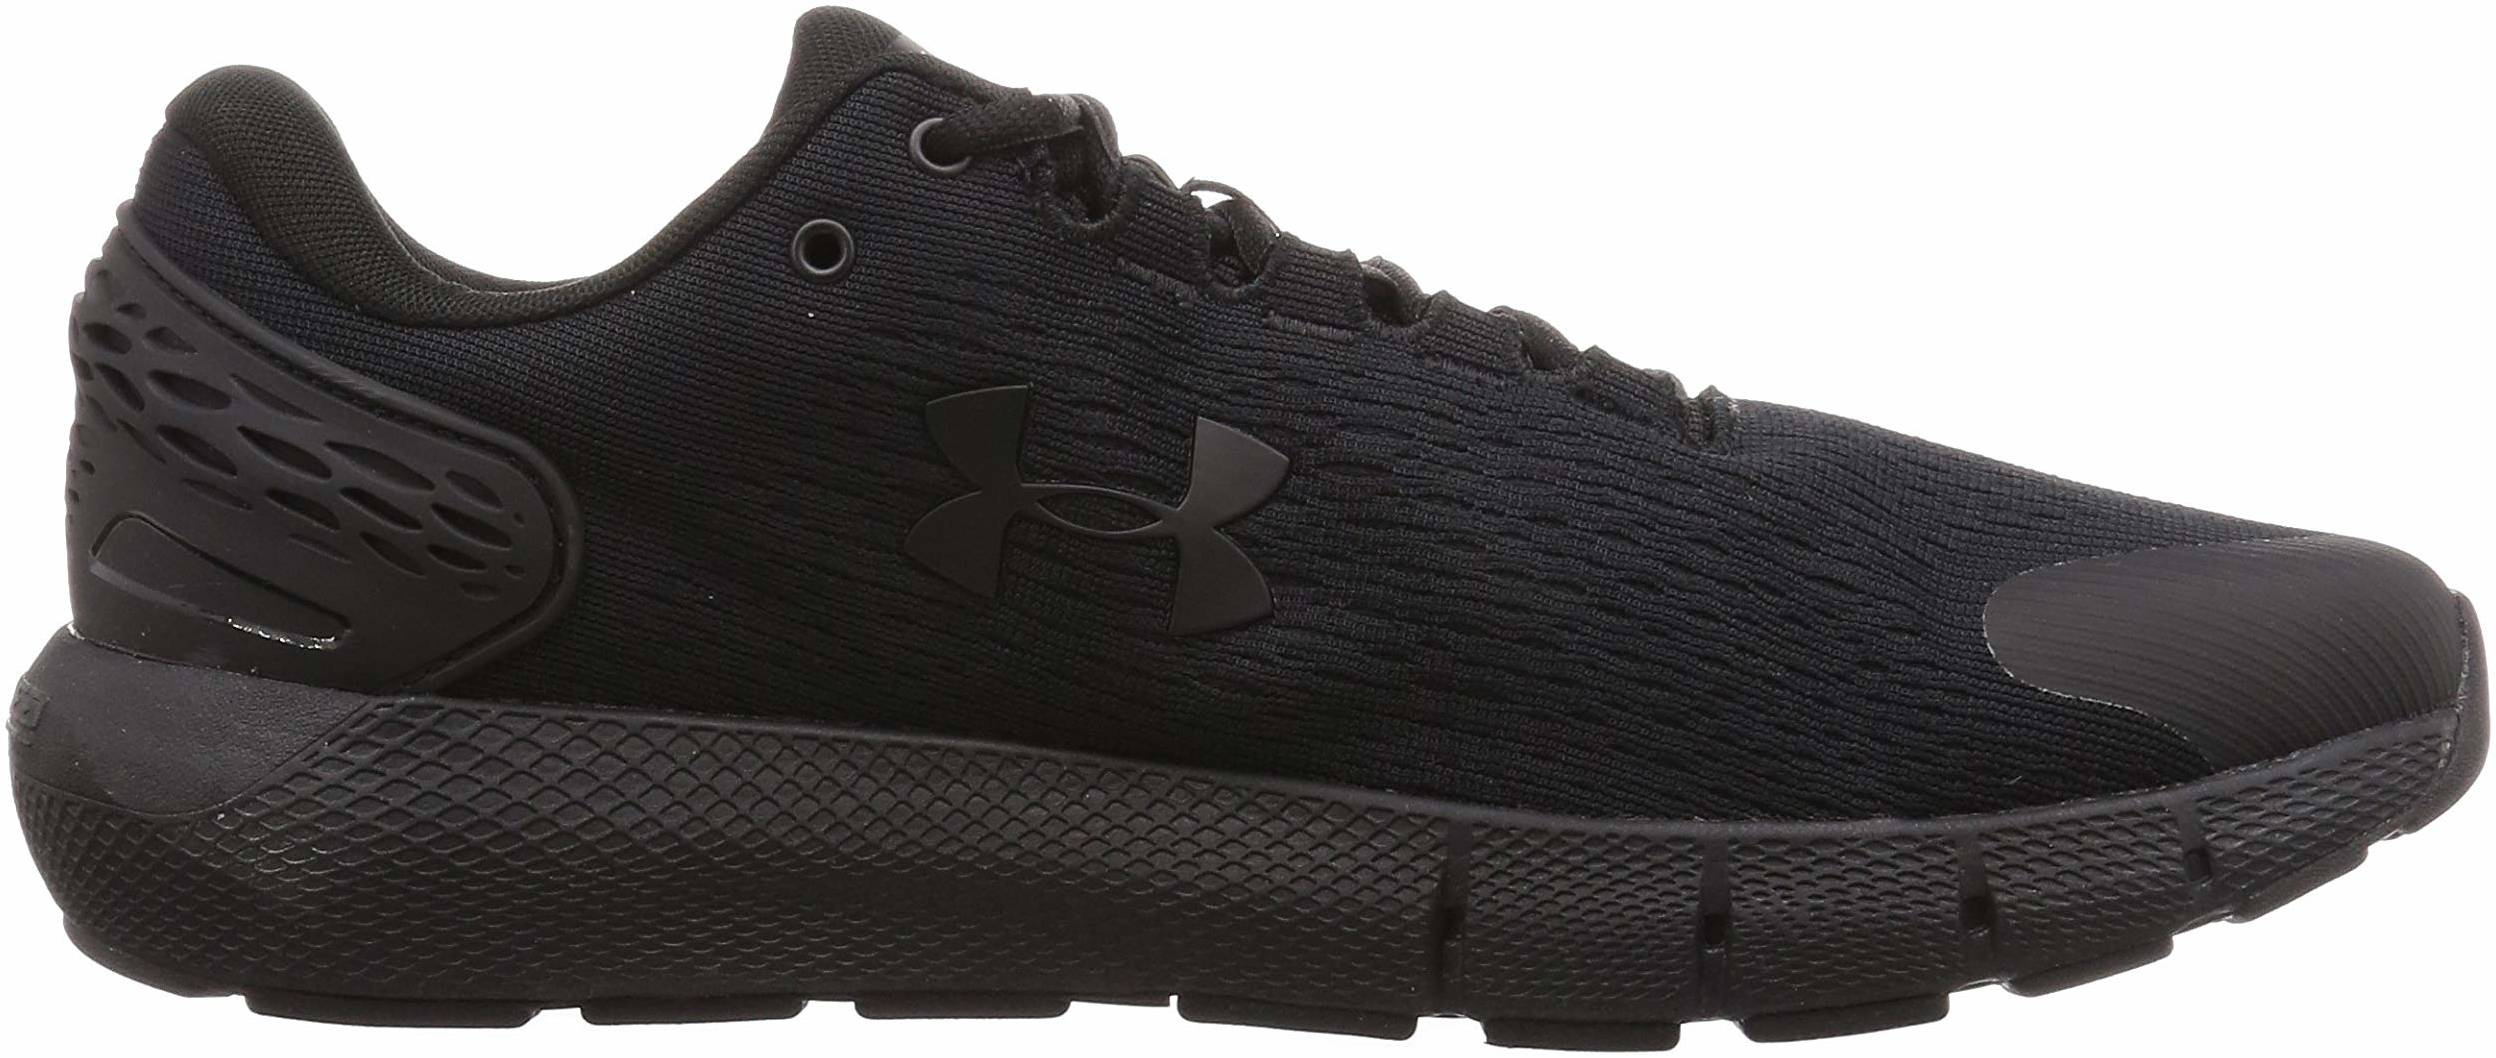 Under Armour Mens Charged Rogue 2 Running Shoes Trainers Sneakers Black Sports 